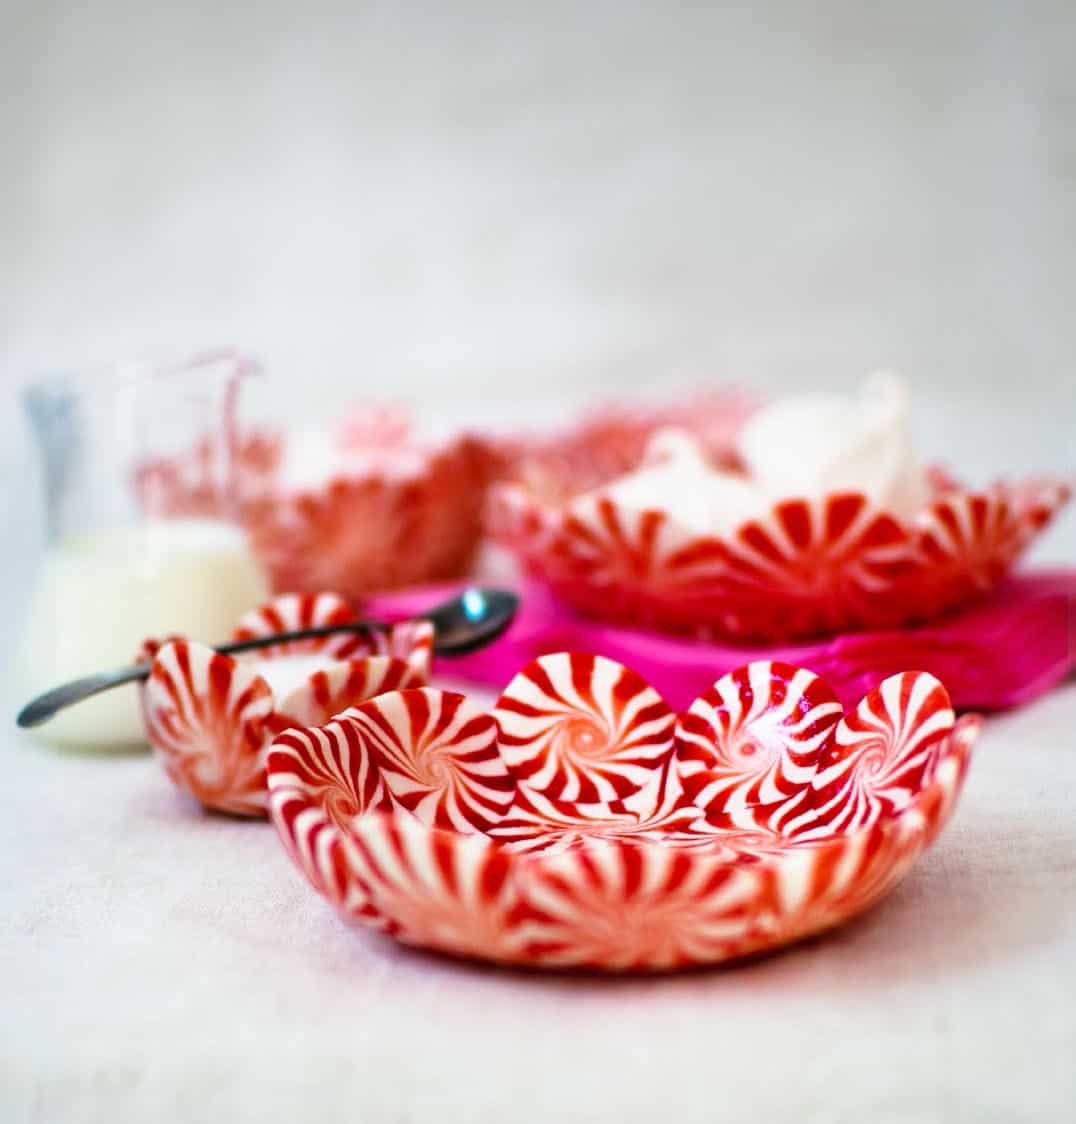 Peppermint candy bowls